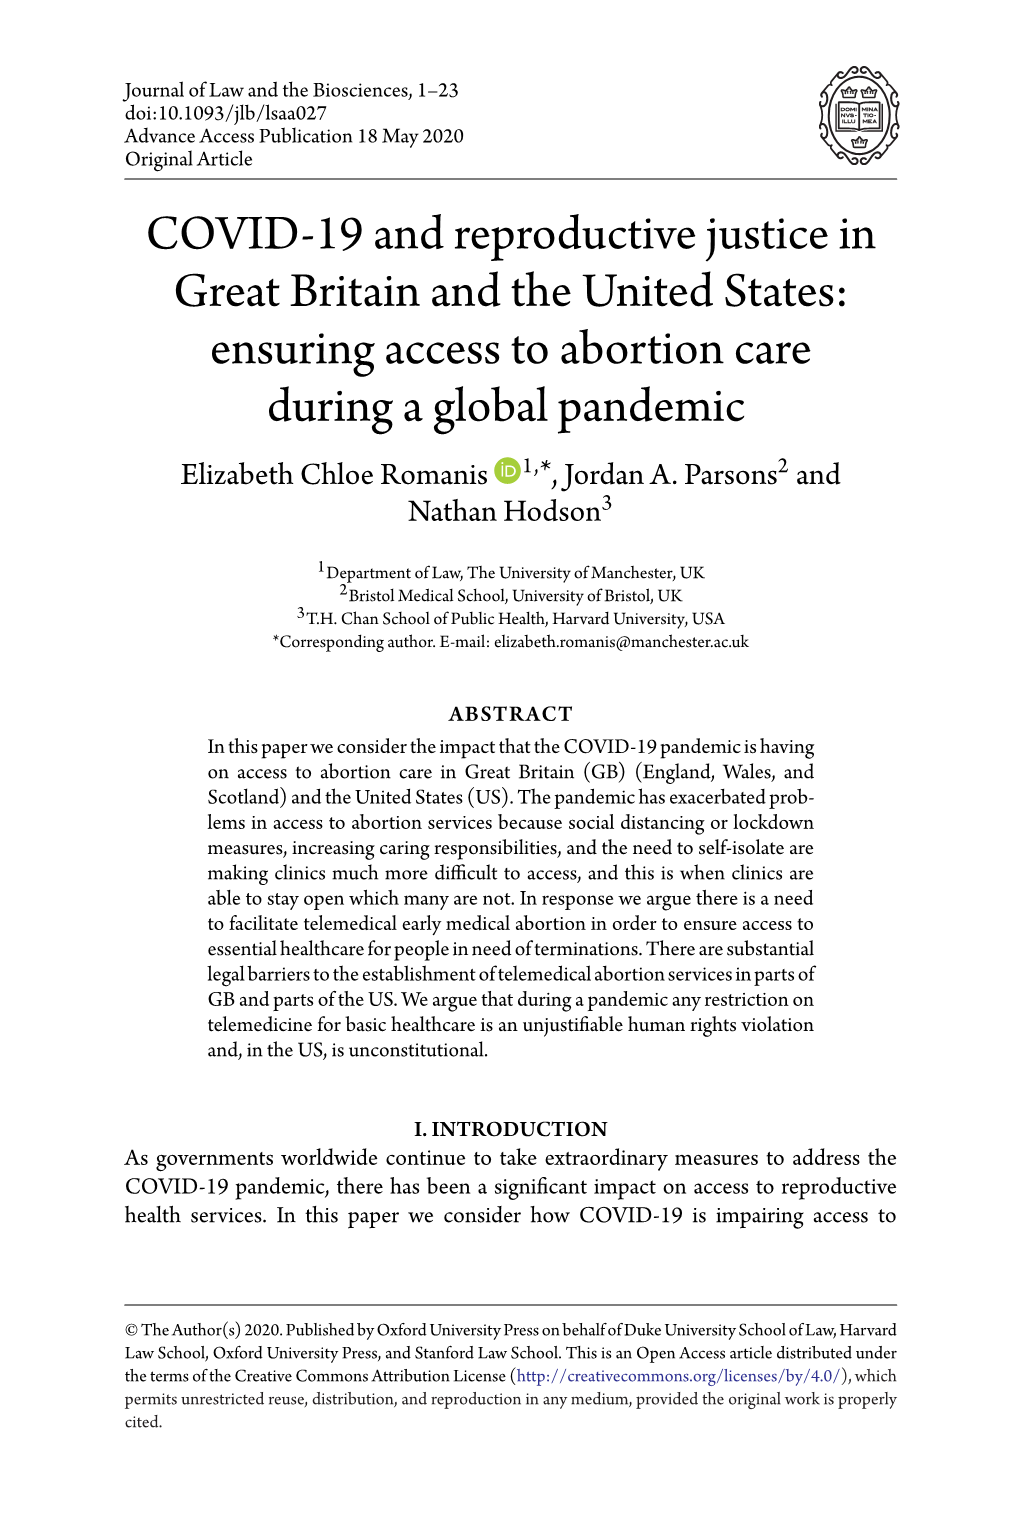 Ensuring Access to Abortion Care During a Global Pandemic Elizabeth Chloe Romanis 1,*,Jordana.Parsons2 and Nathan Hodson3